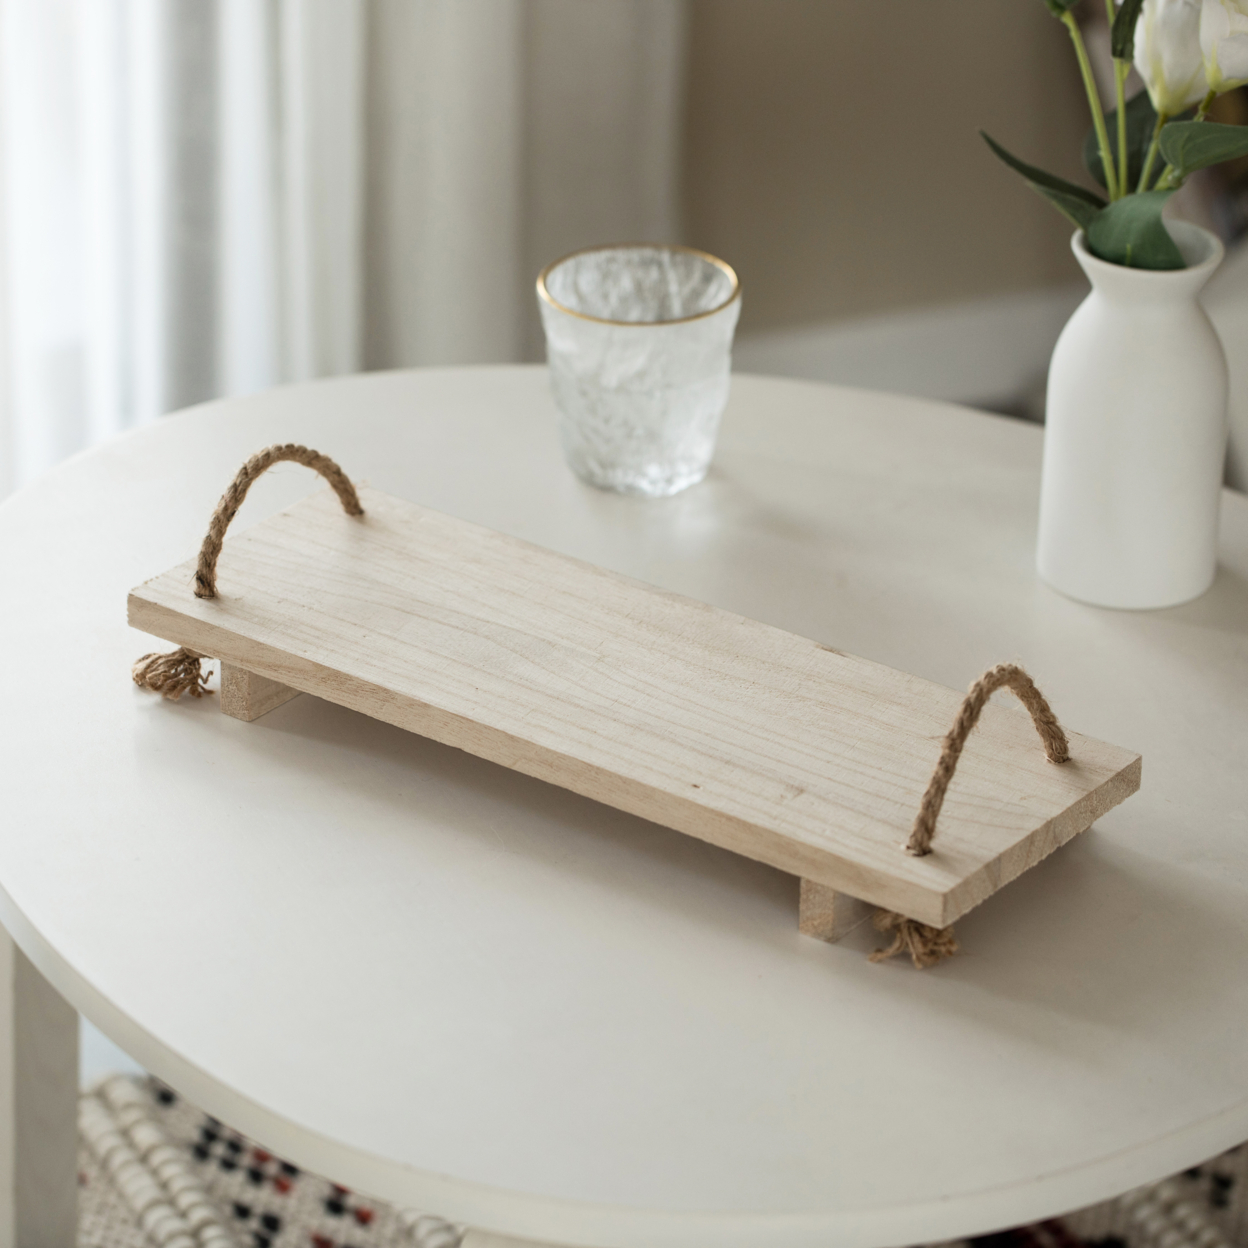 Decorative Natural Wood Rectangular Tray Serving Board With Rope Handles